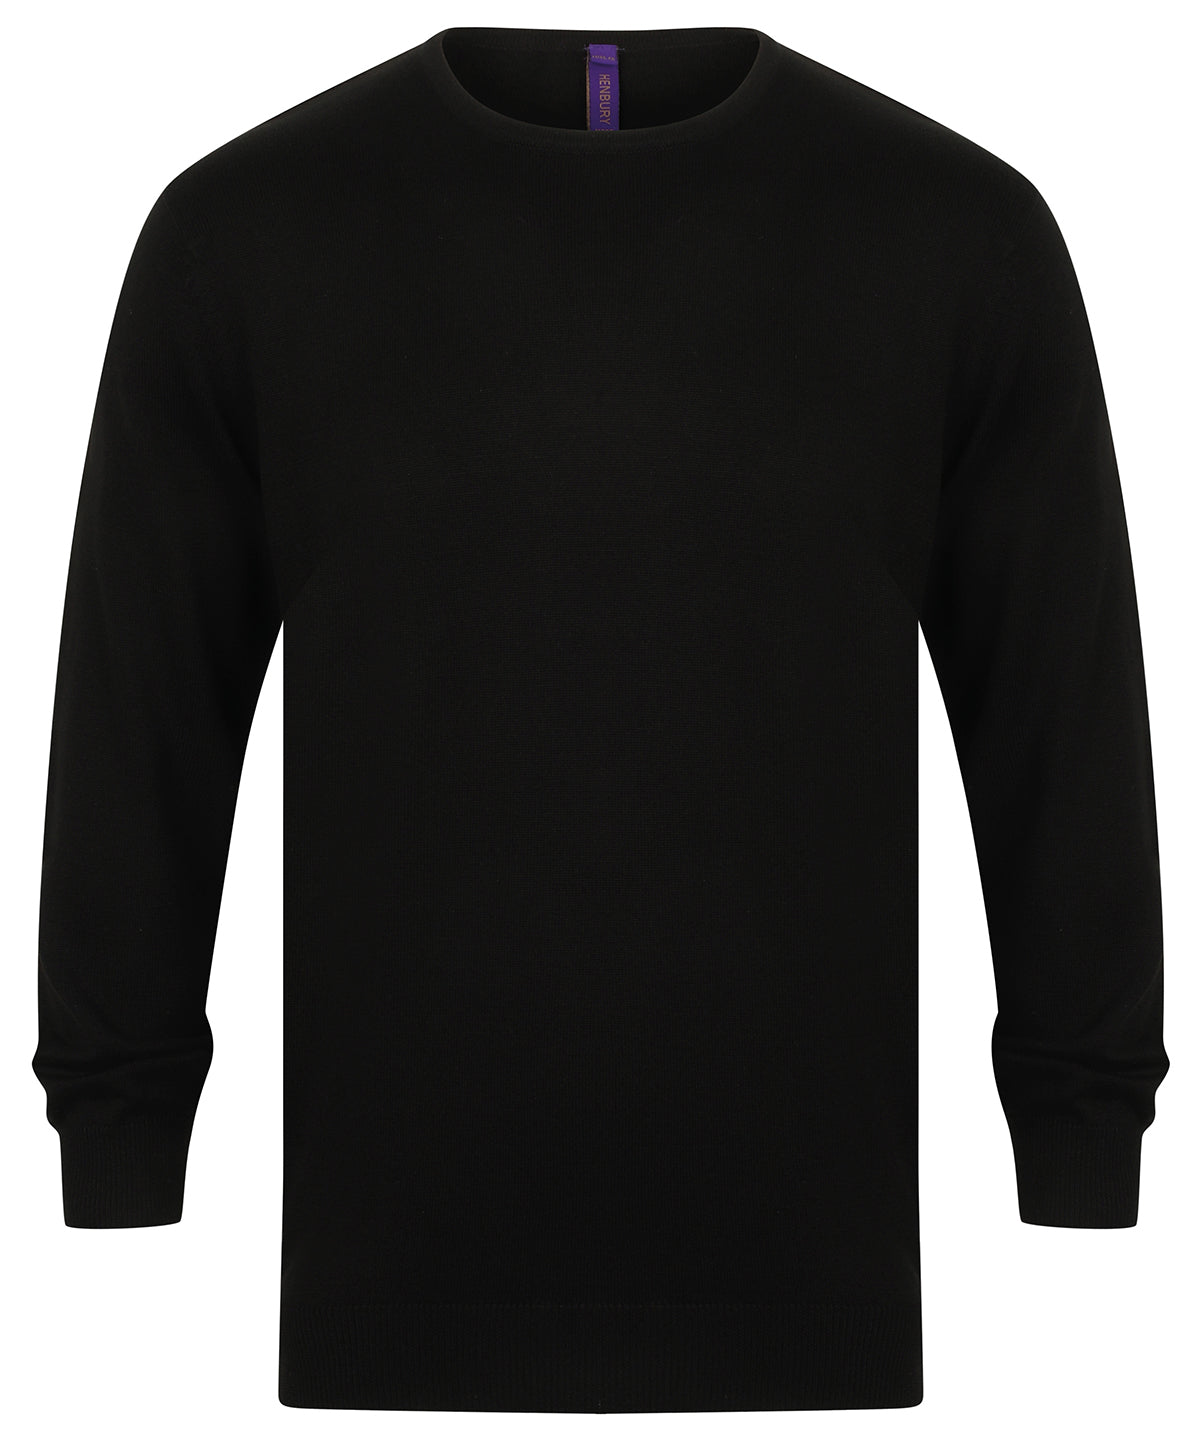 Personalised Knitted Jumpers - Black Henbury Crew neck jumper